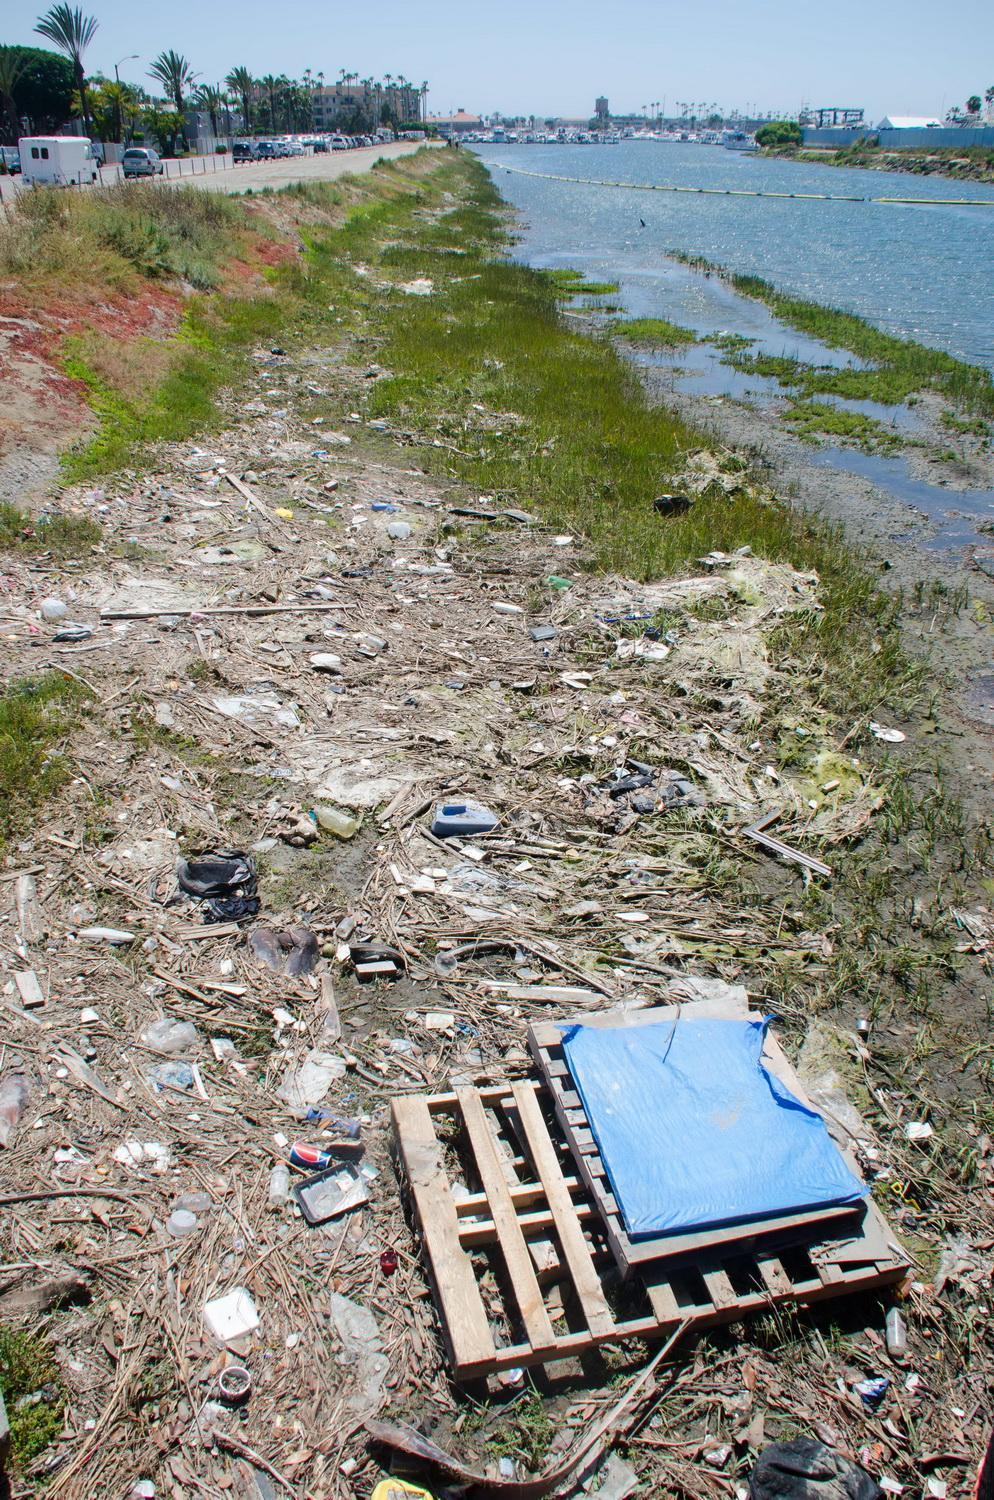 Bolsa Chica channel with garbage